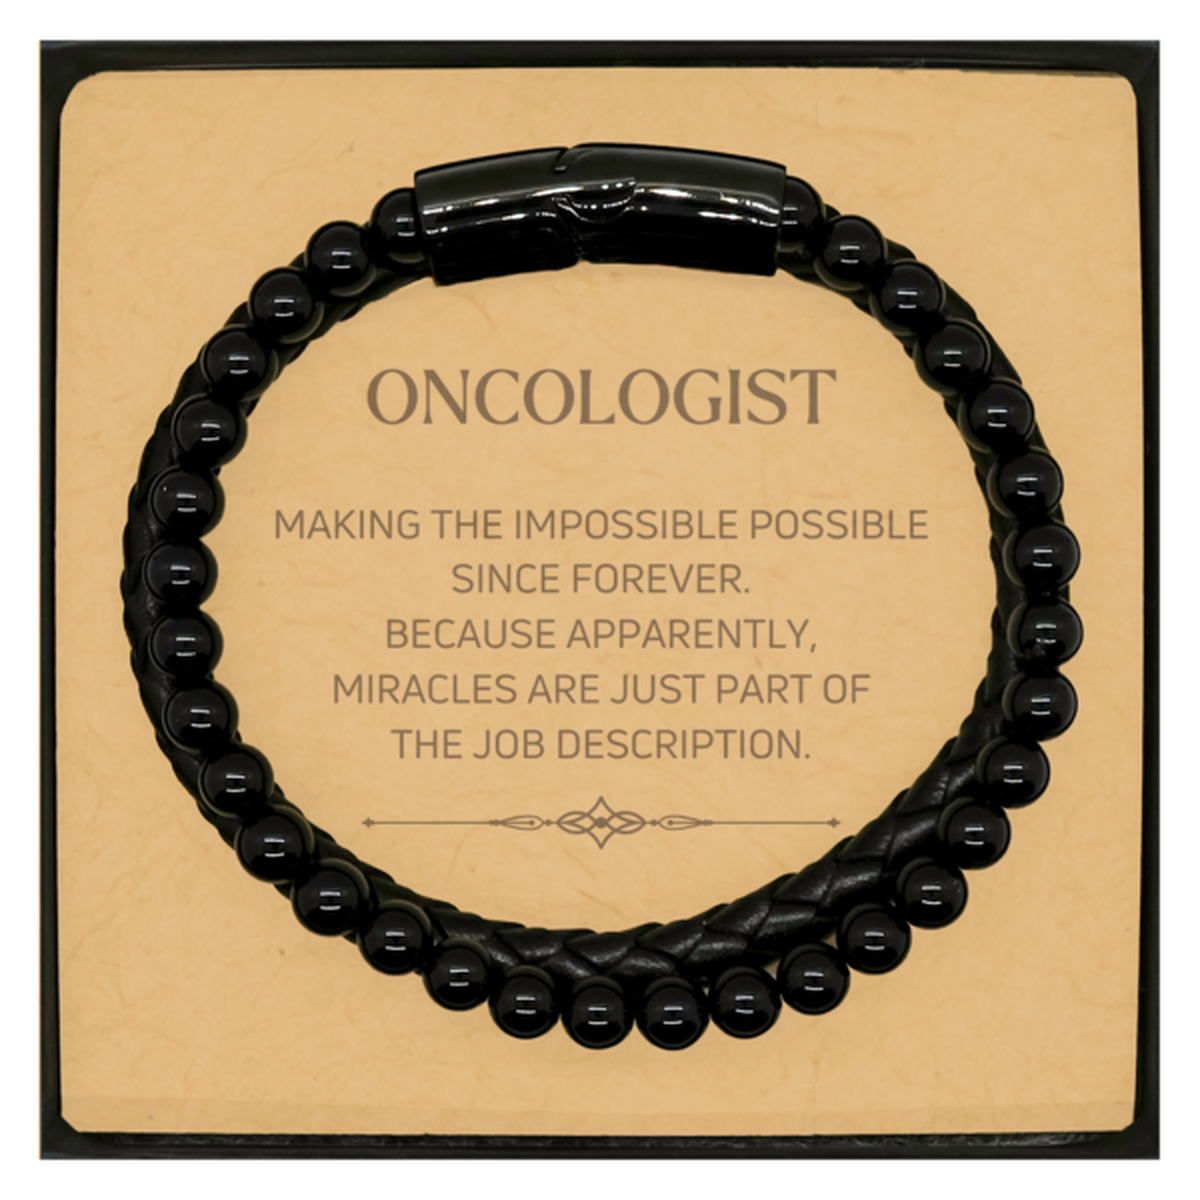 Funny Oncologist Gifts, Miracles are just part of the job description, Inspirational Birthday Christmas Stone Leather Bracelets For Oncologist, Men, Women, Coworkers, Friends, Boss